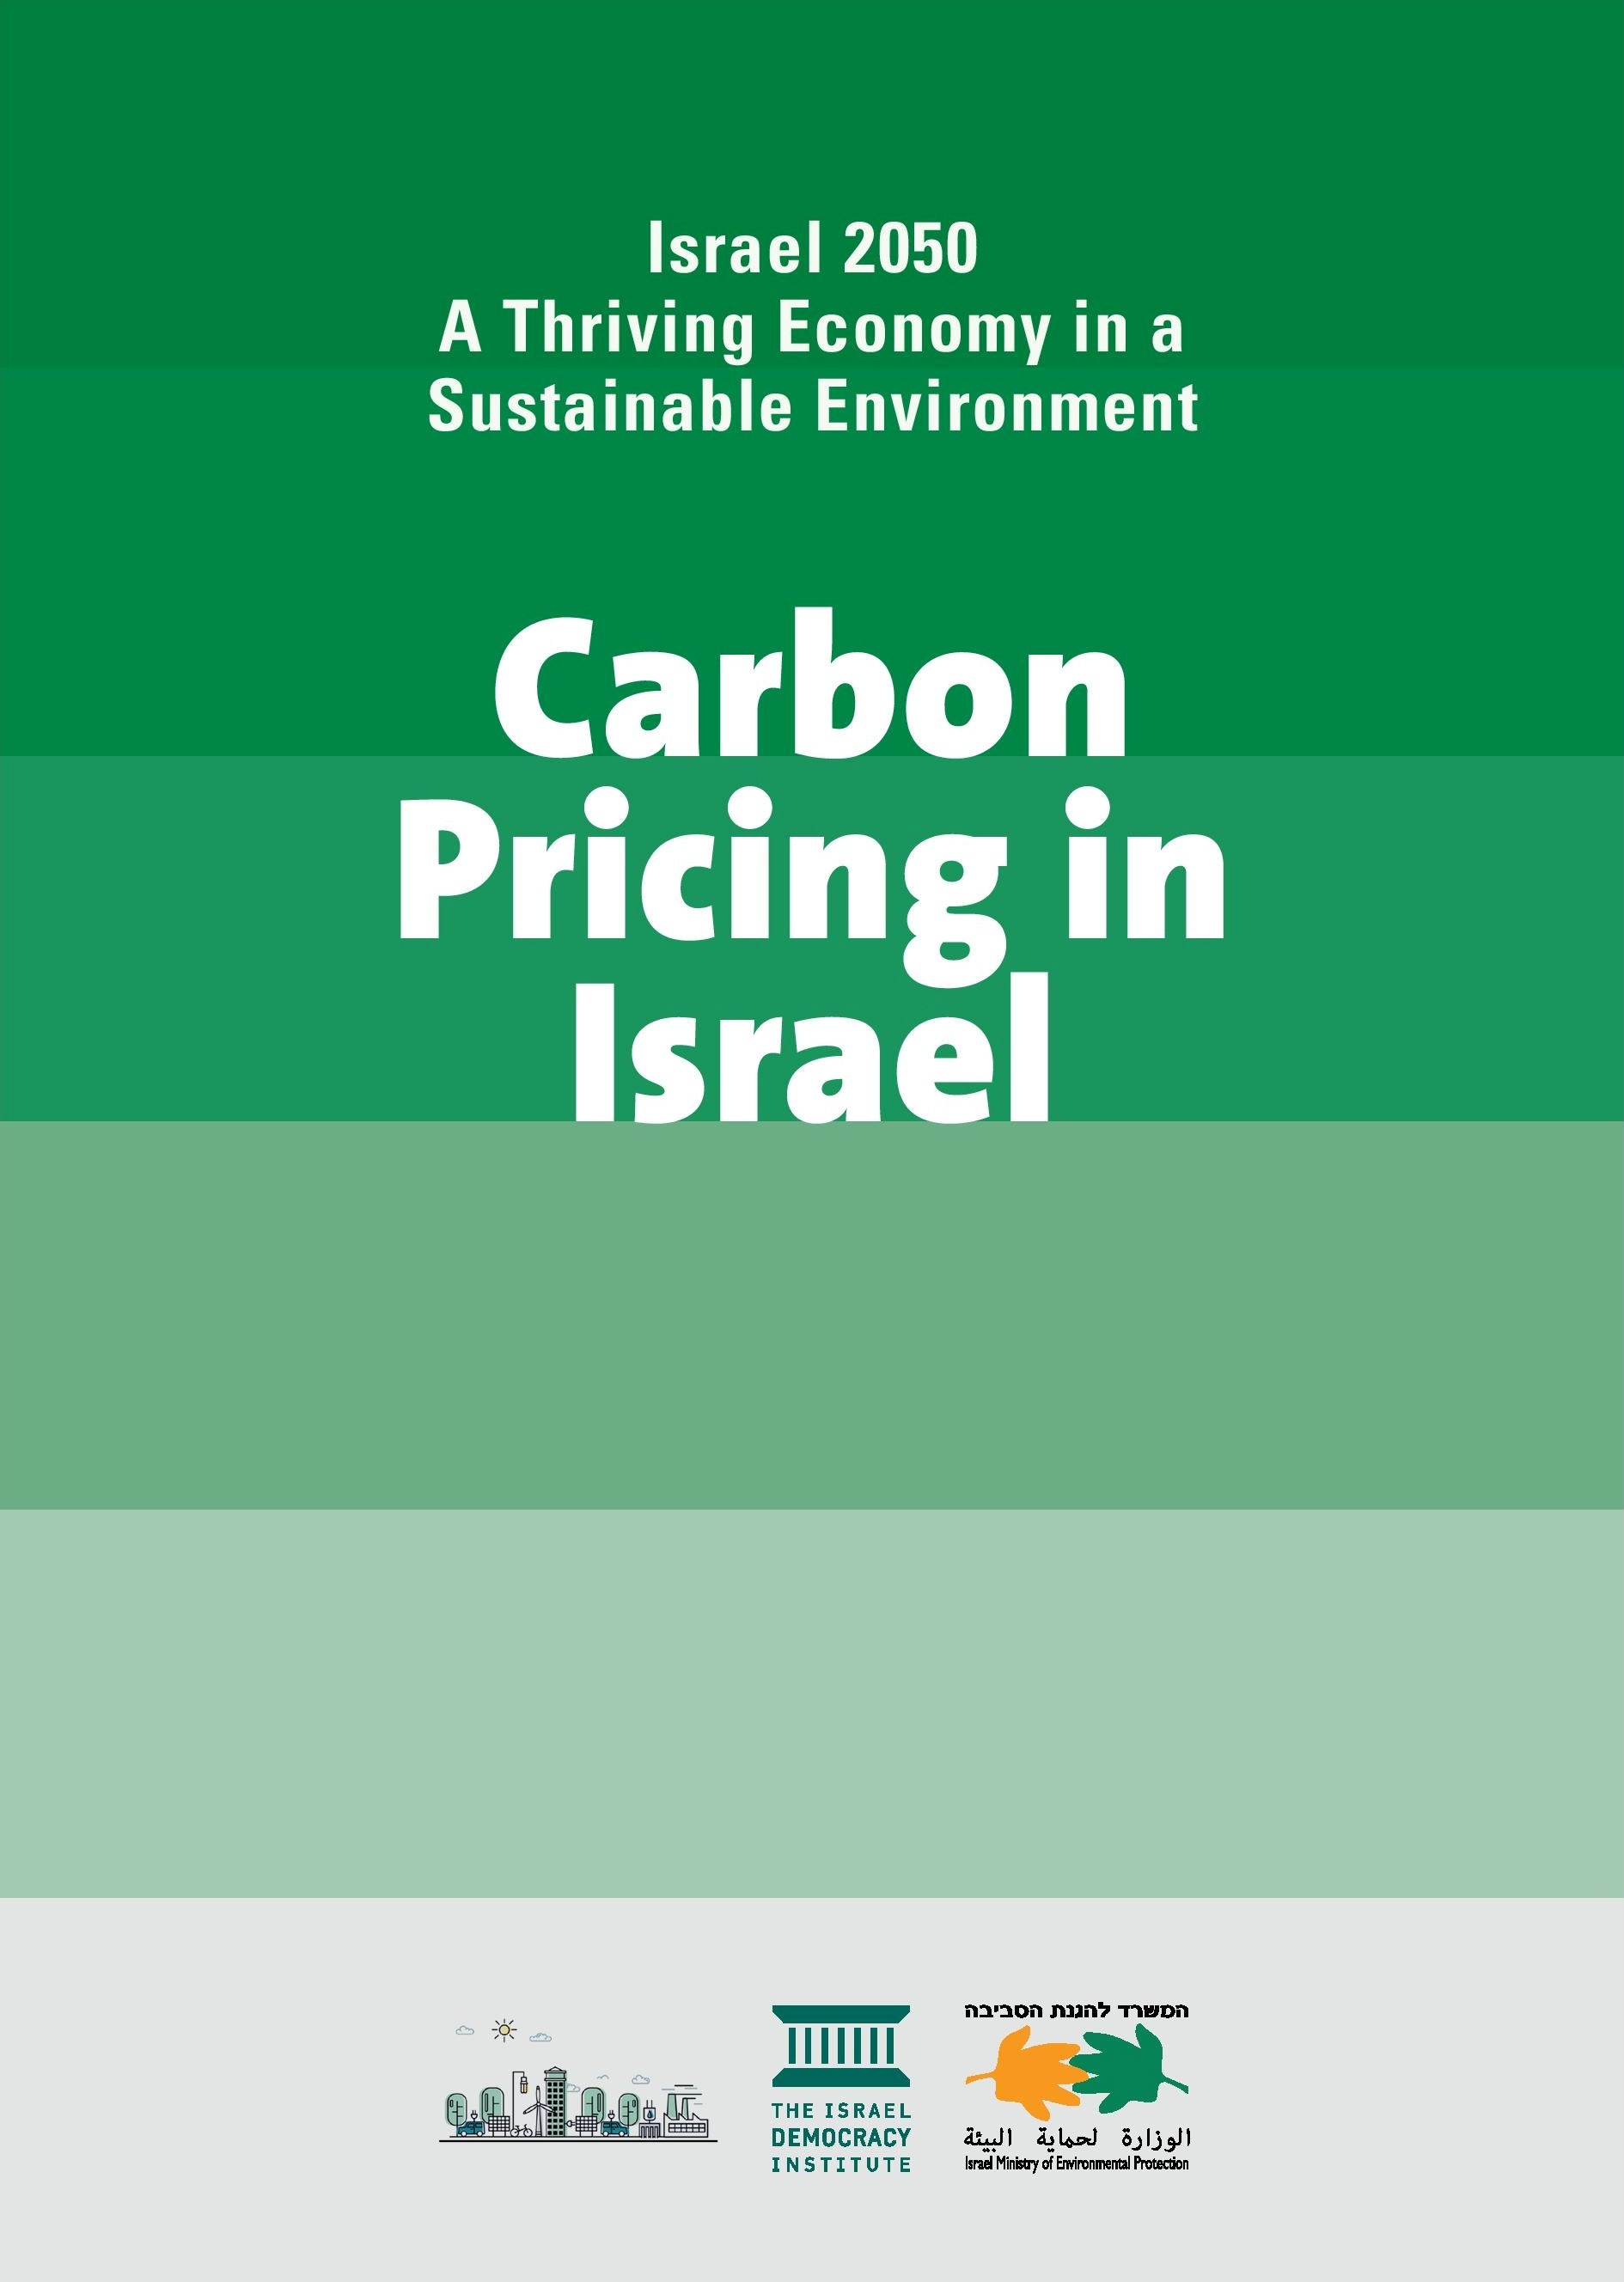 Carbon Pricing in Israel